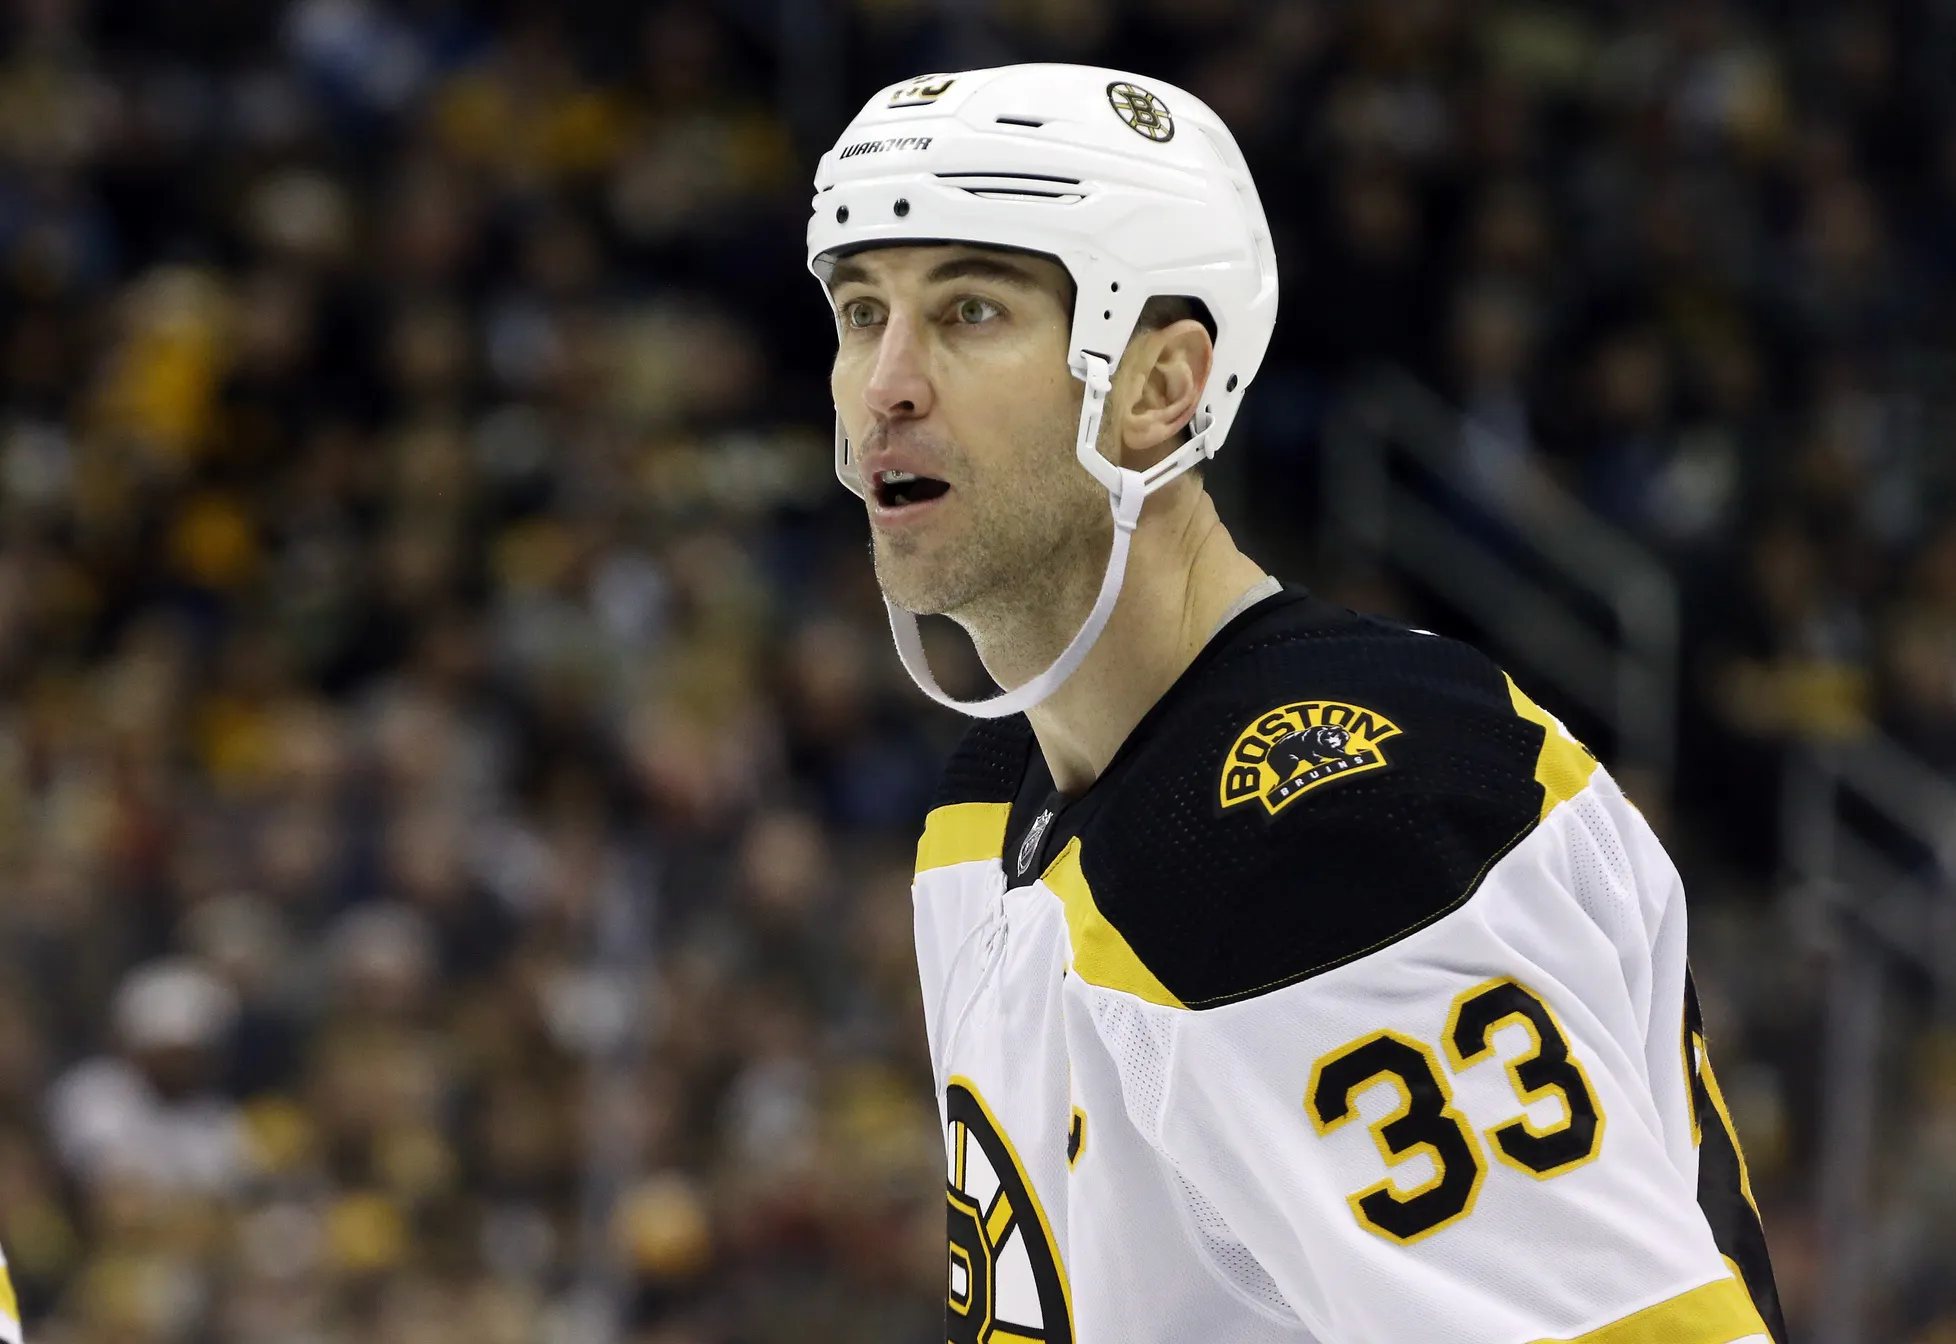 Boston Bruins defender and captain Zdeno Chara of Slovakia gets in some  warm-up time before the start against the Calgary Flames on October 19,  2006 at the TD Banknorth Garden in Boston. (